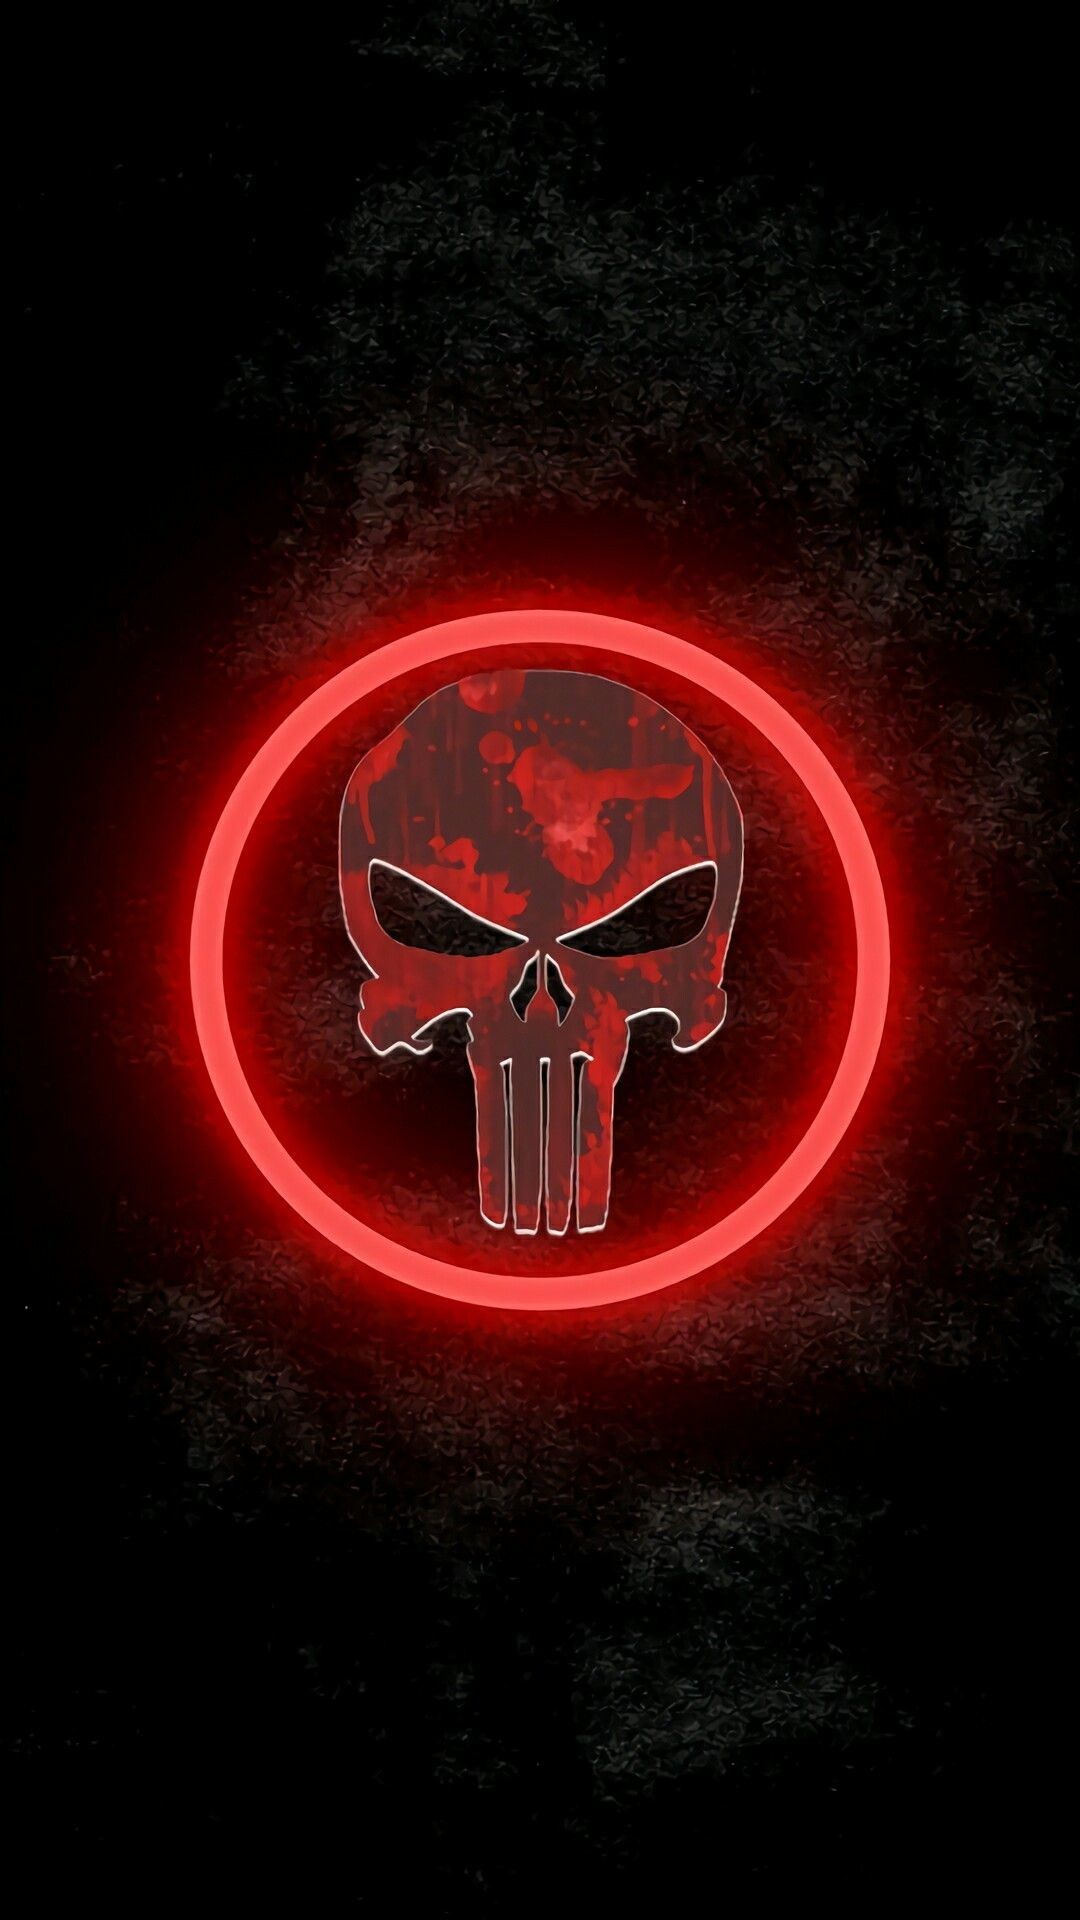 1080x1920 1920x1080 Netflix were so psyched to get Jon Bernthal to play Frank  Castle/The Punisher in season 2 of Daredevil, that they began work on a  spin-off for the ...